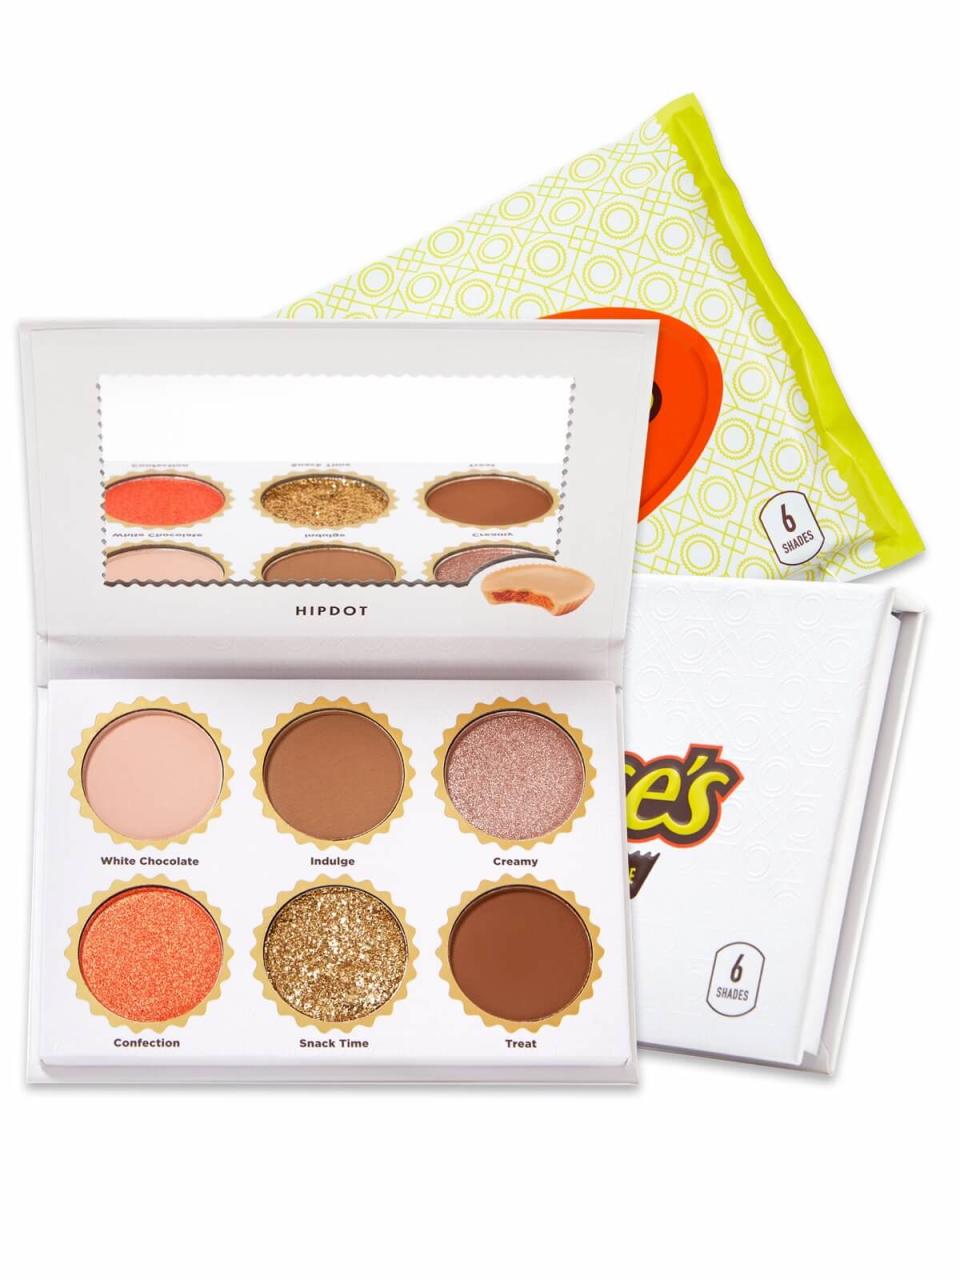 a photo of reese's makeup line with white chocolate pallet including six colors in pink, orange, dark brown, and tan